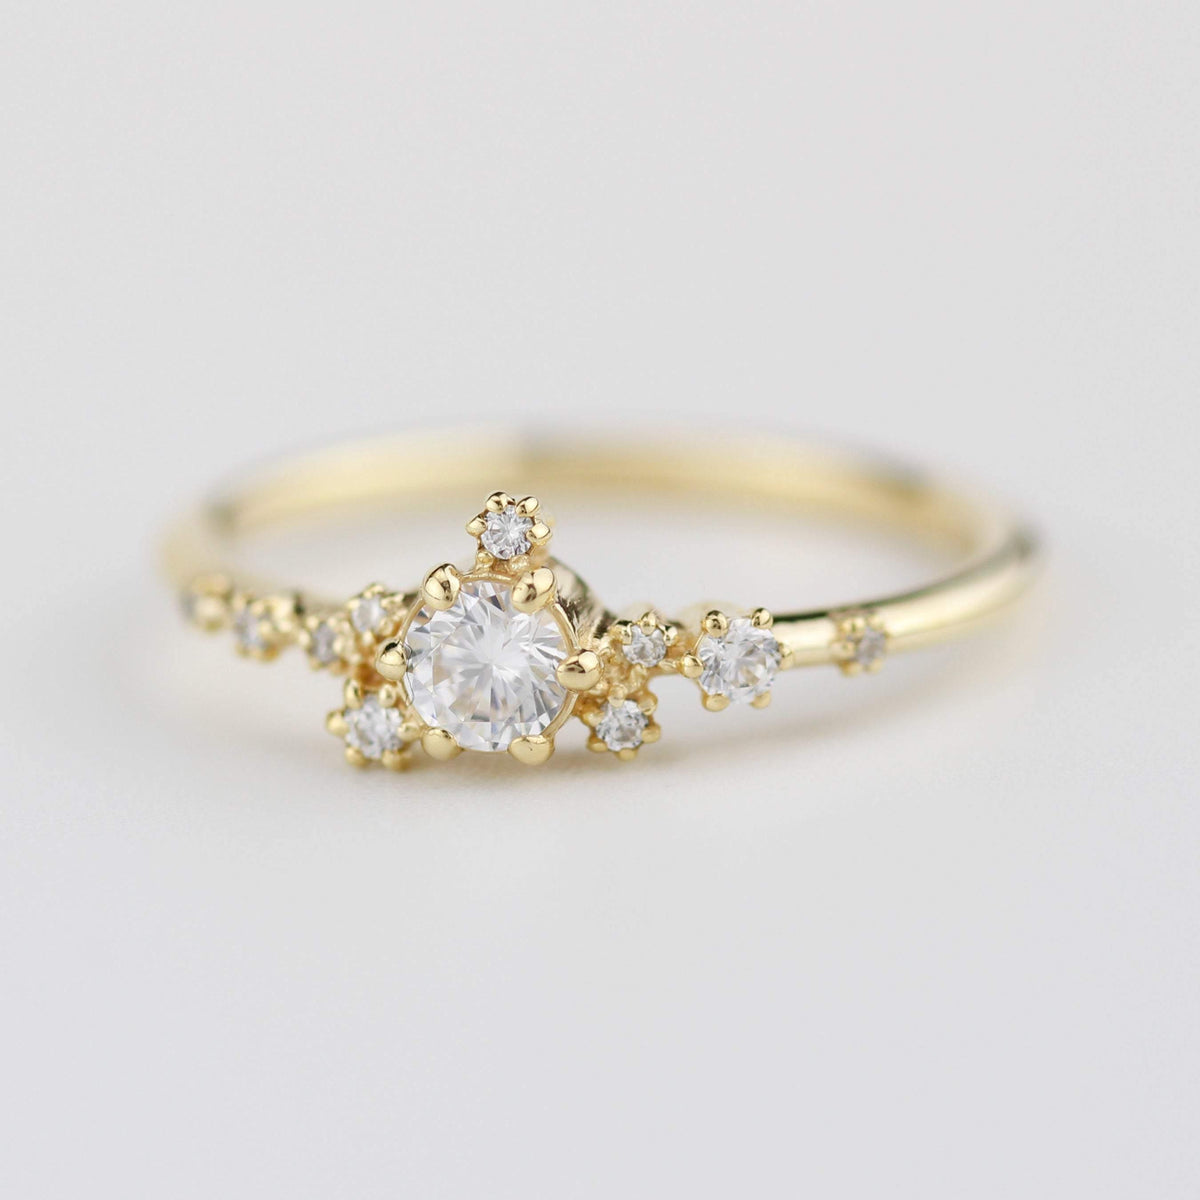 Unique engagement ring, engagement ring white diamond, delicate engage ...